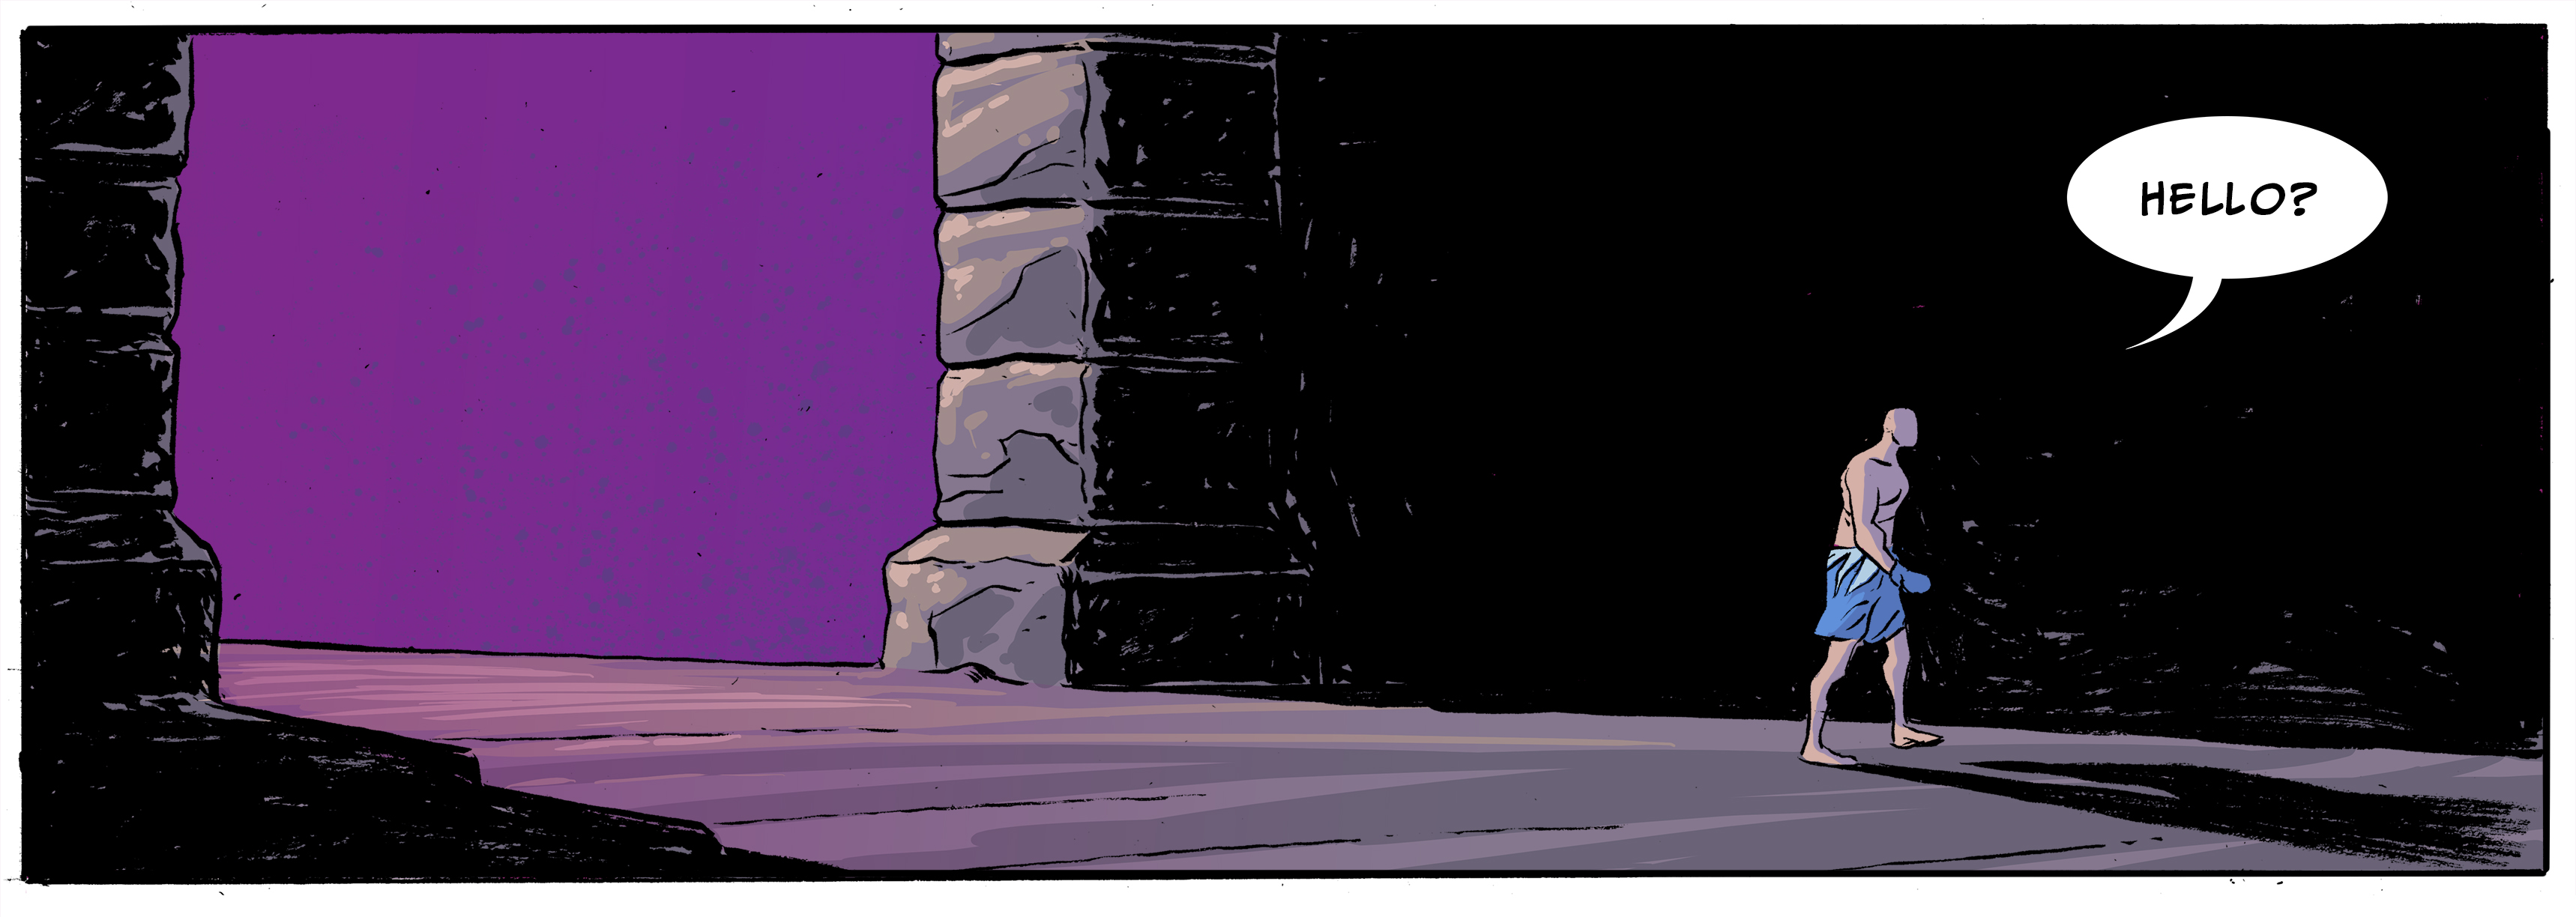 A panel from Barry Keegan's mini comic, The Shadow Realm